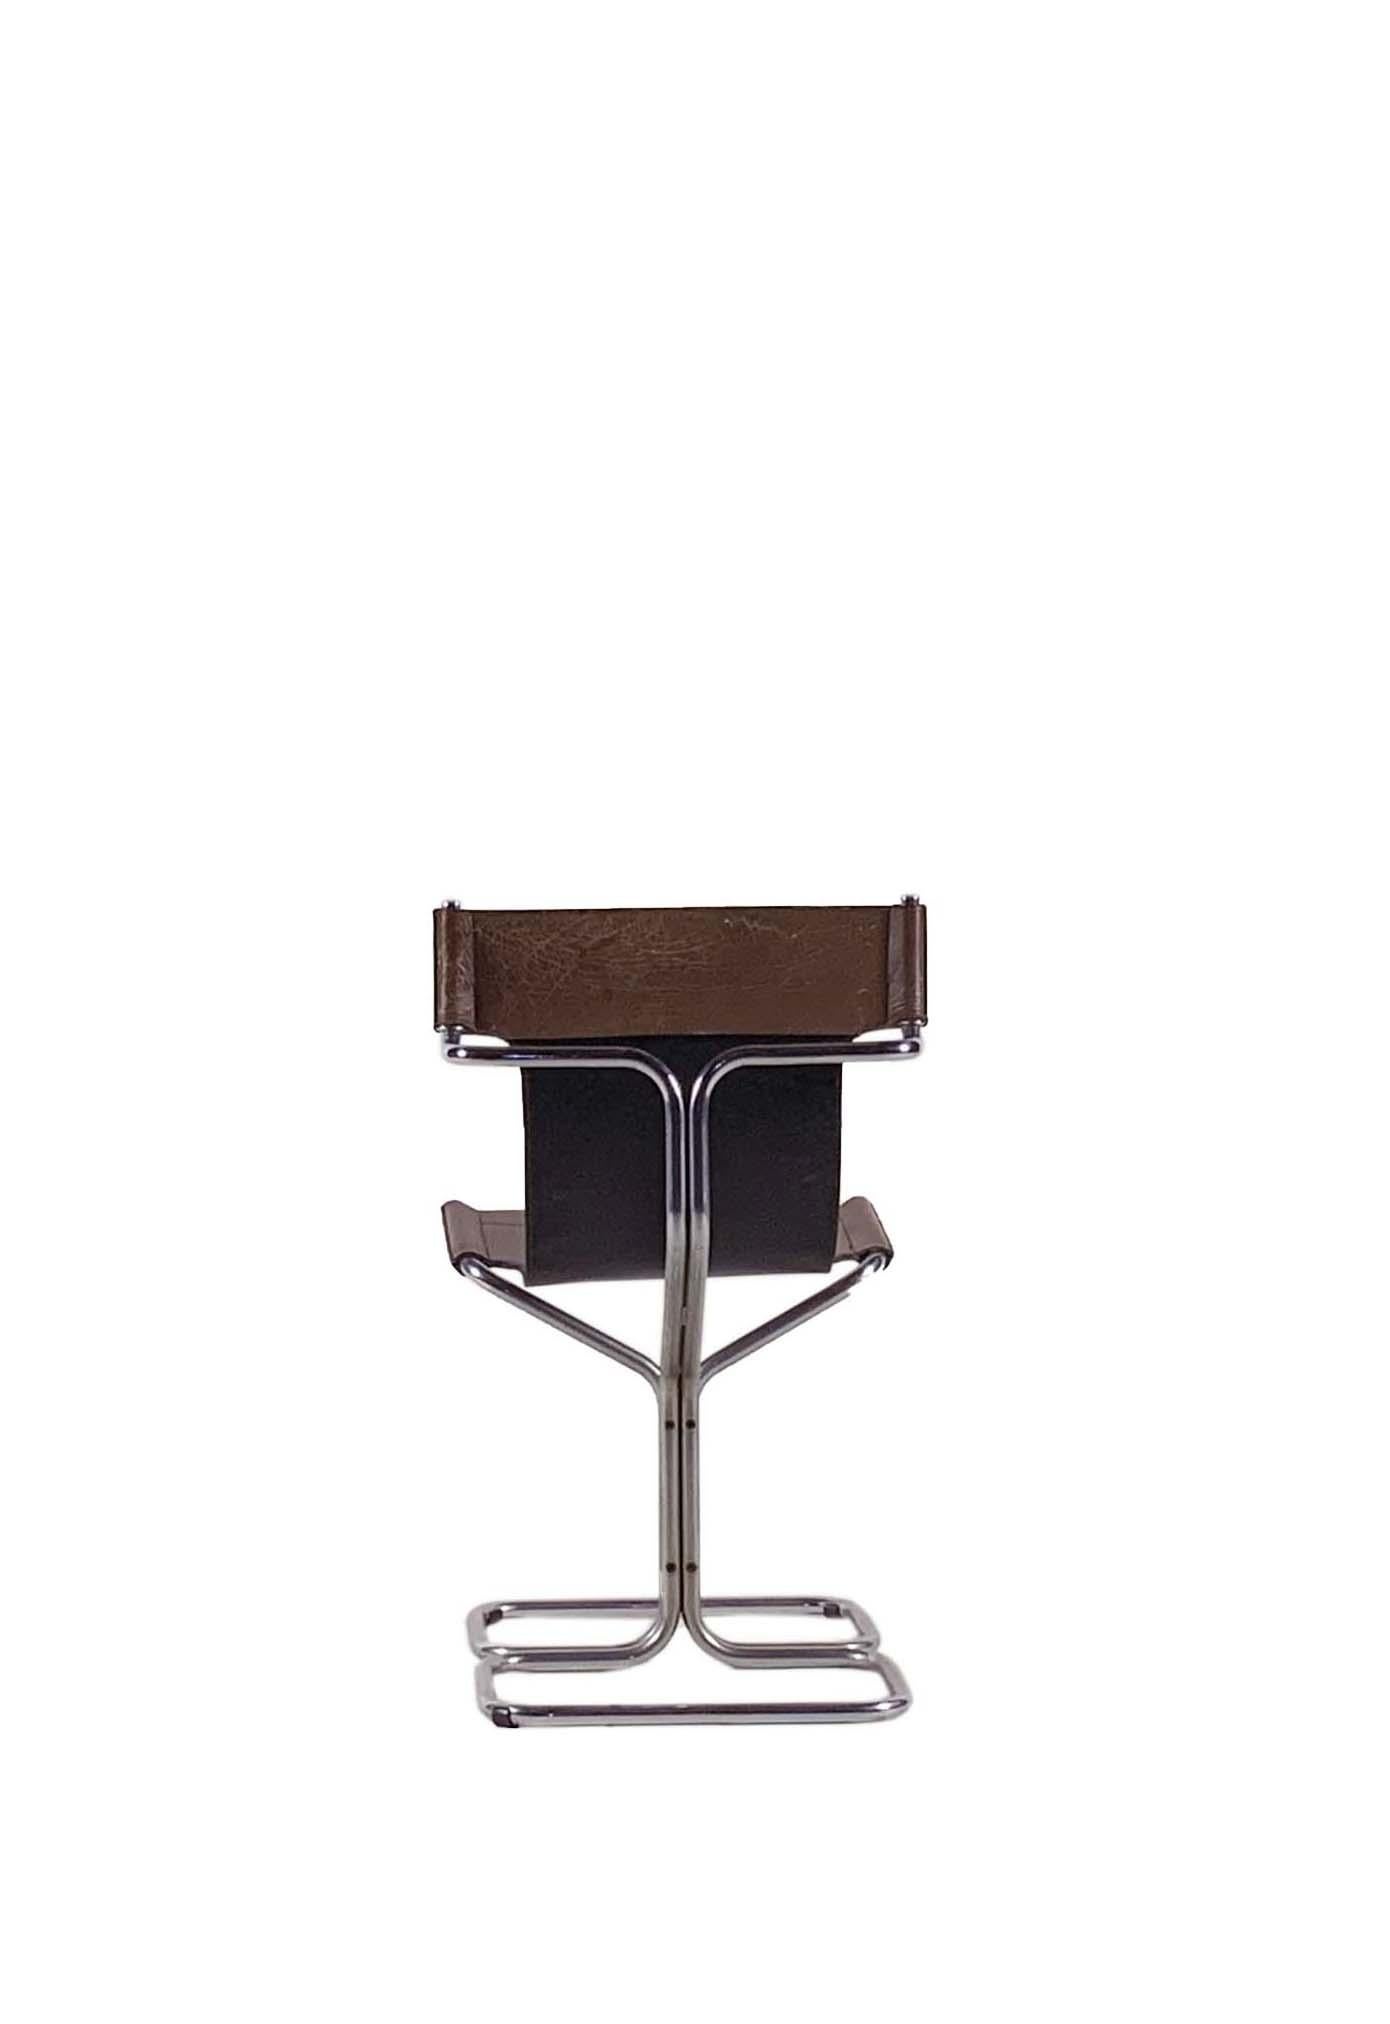 Topos Chair by Gruppo Dam for Gruppo Industriale Busnelli, 1969 In Fair Condition For Sale In Misinto, IT